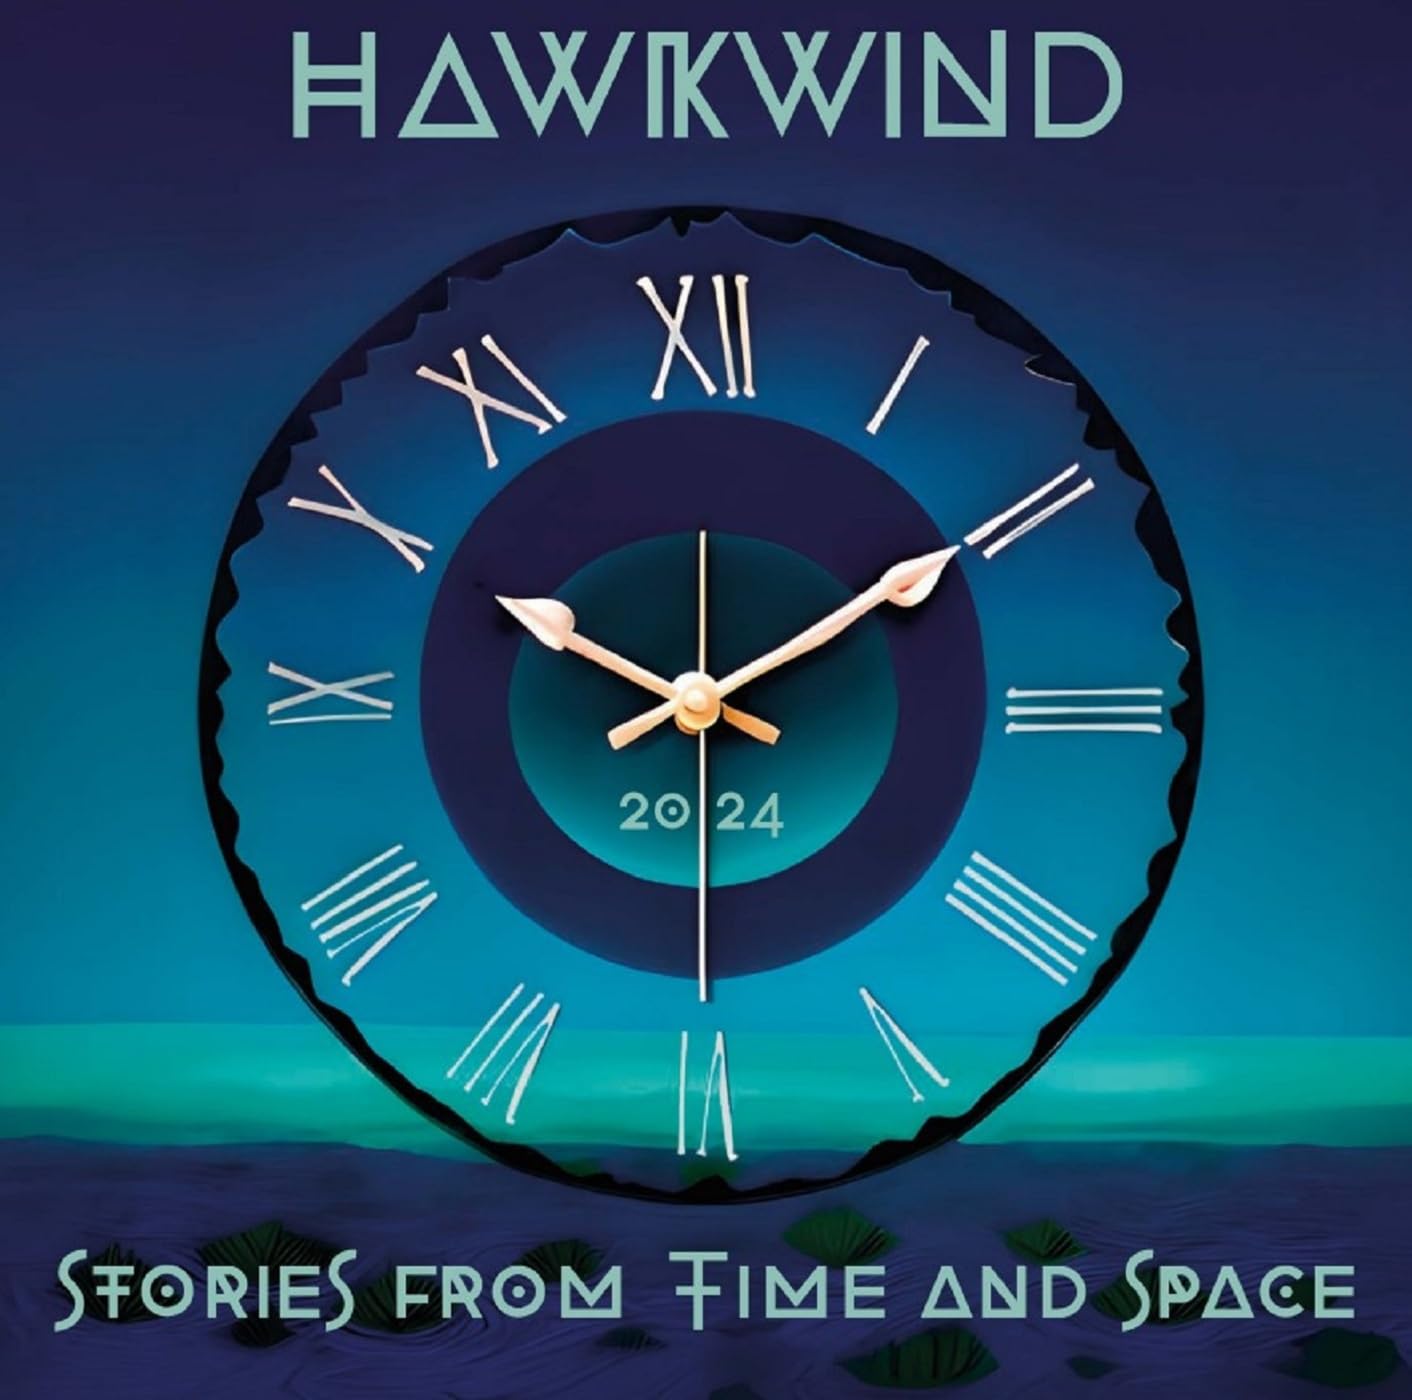 HAWKWIND – STORIES FROM TIME AND SPACE CD